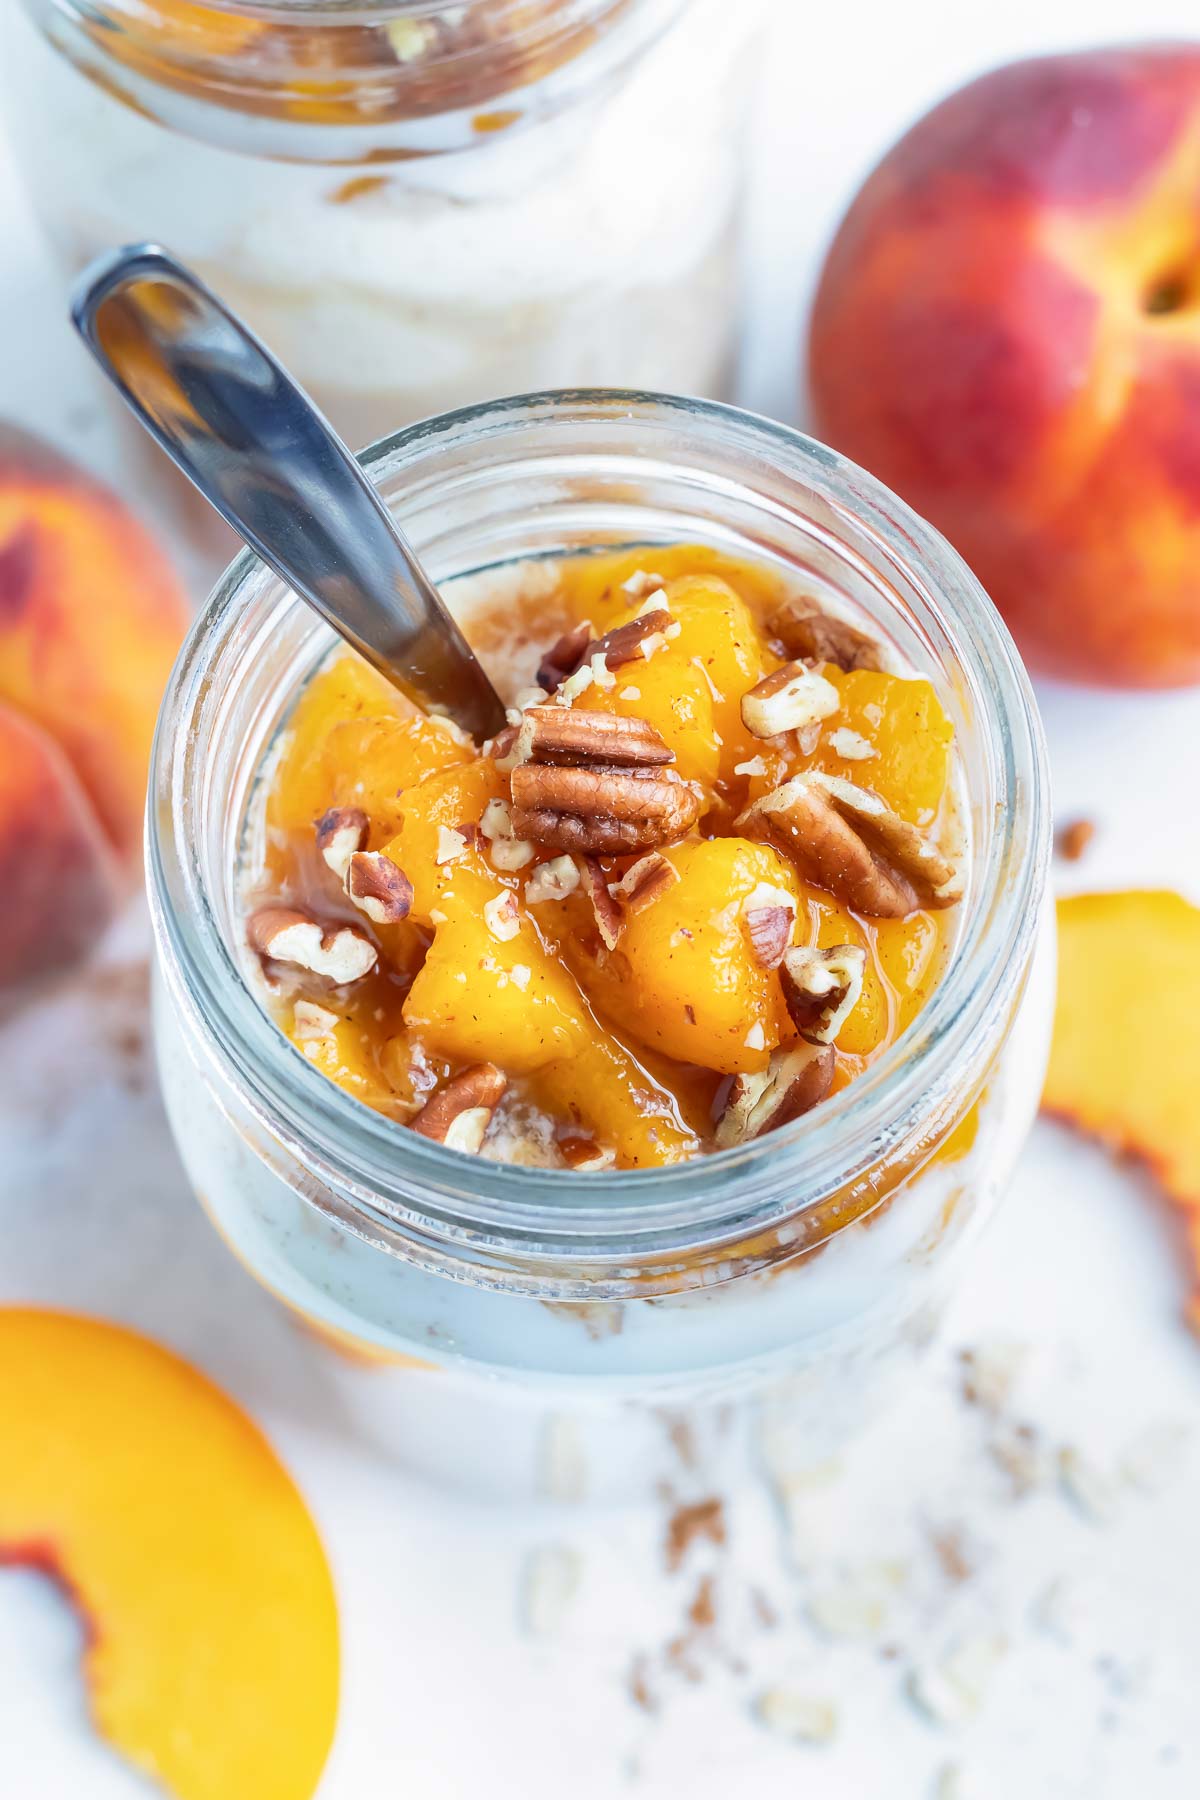 Mason jar peach cobbler overnight oats are topped with fresh peaches and toasted pecans.